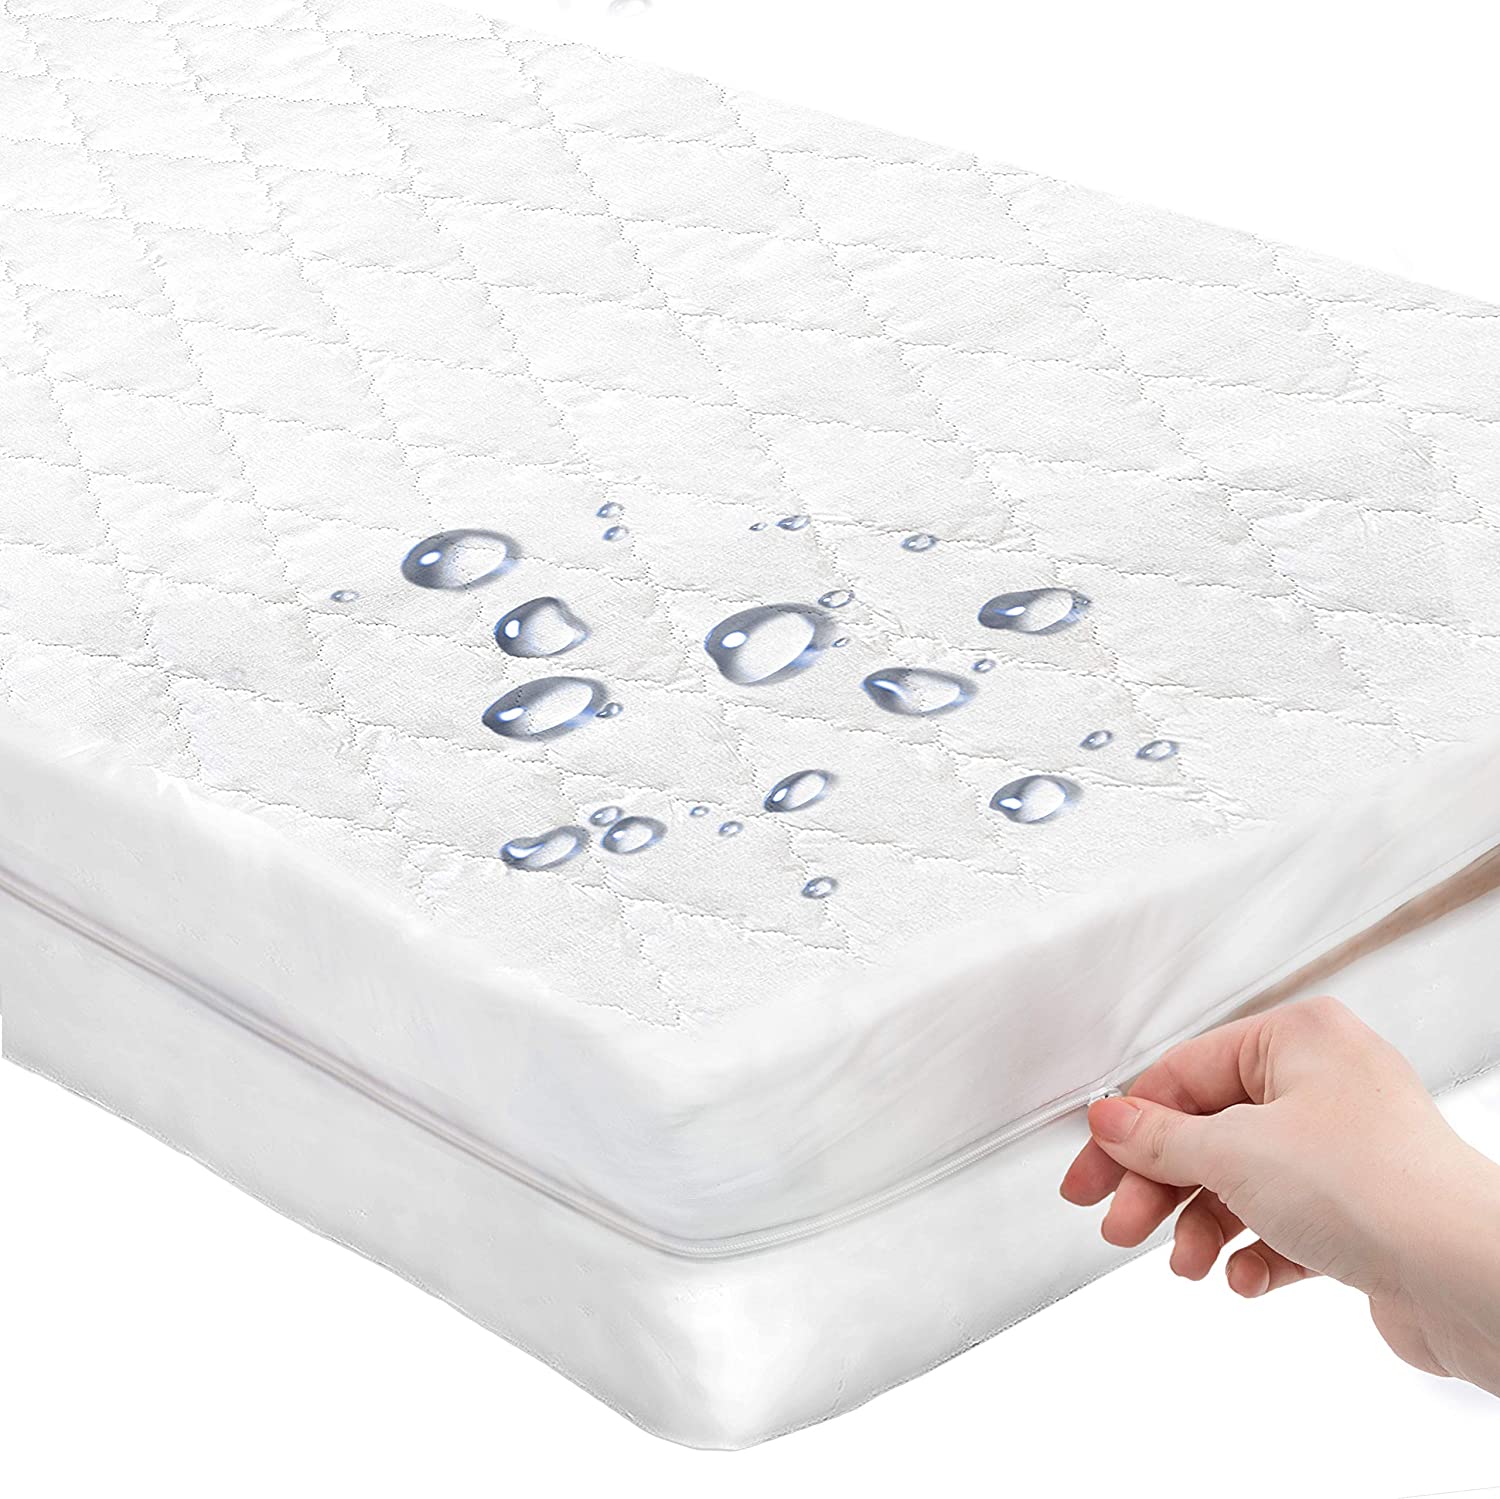 COZYCUDDLES Skin-Friendly Quilted Crib Mattress Cover